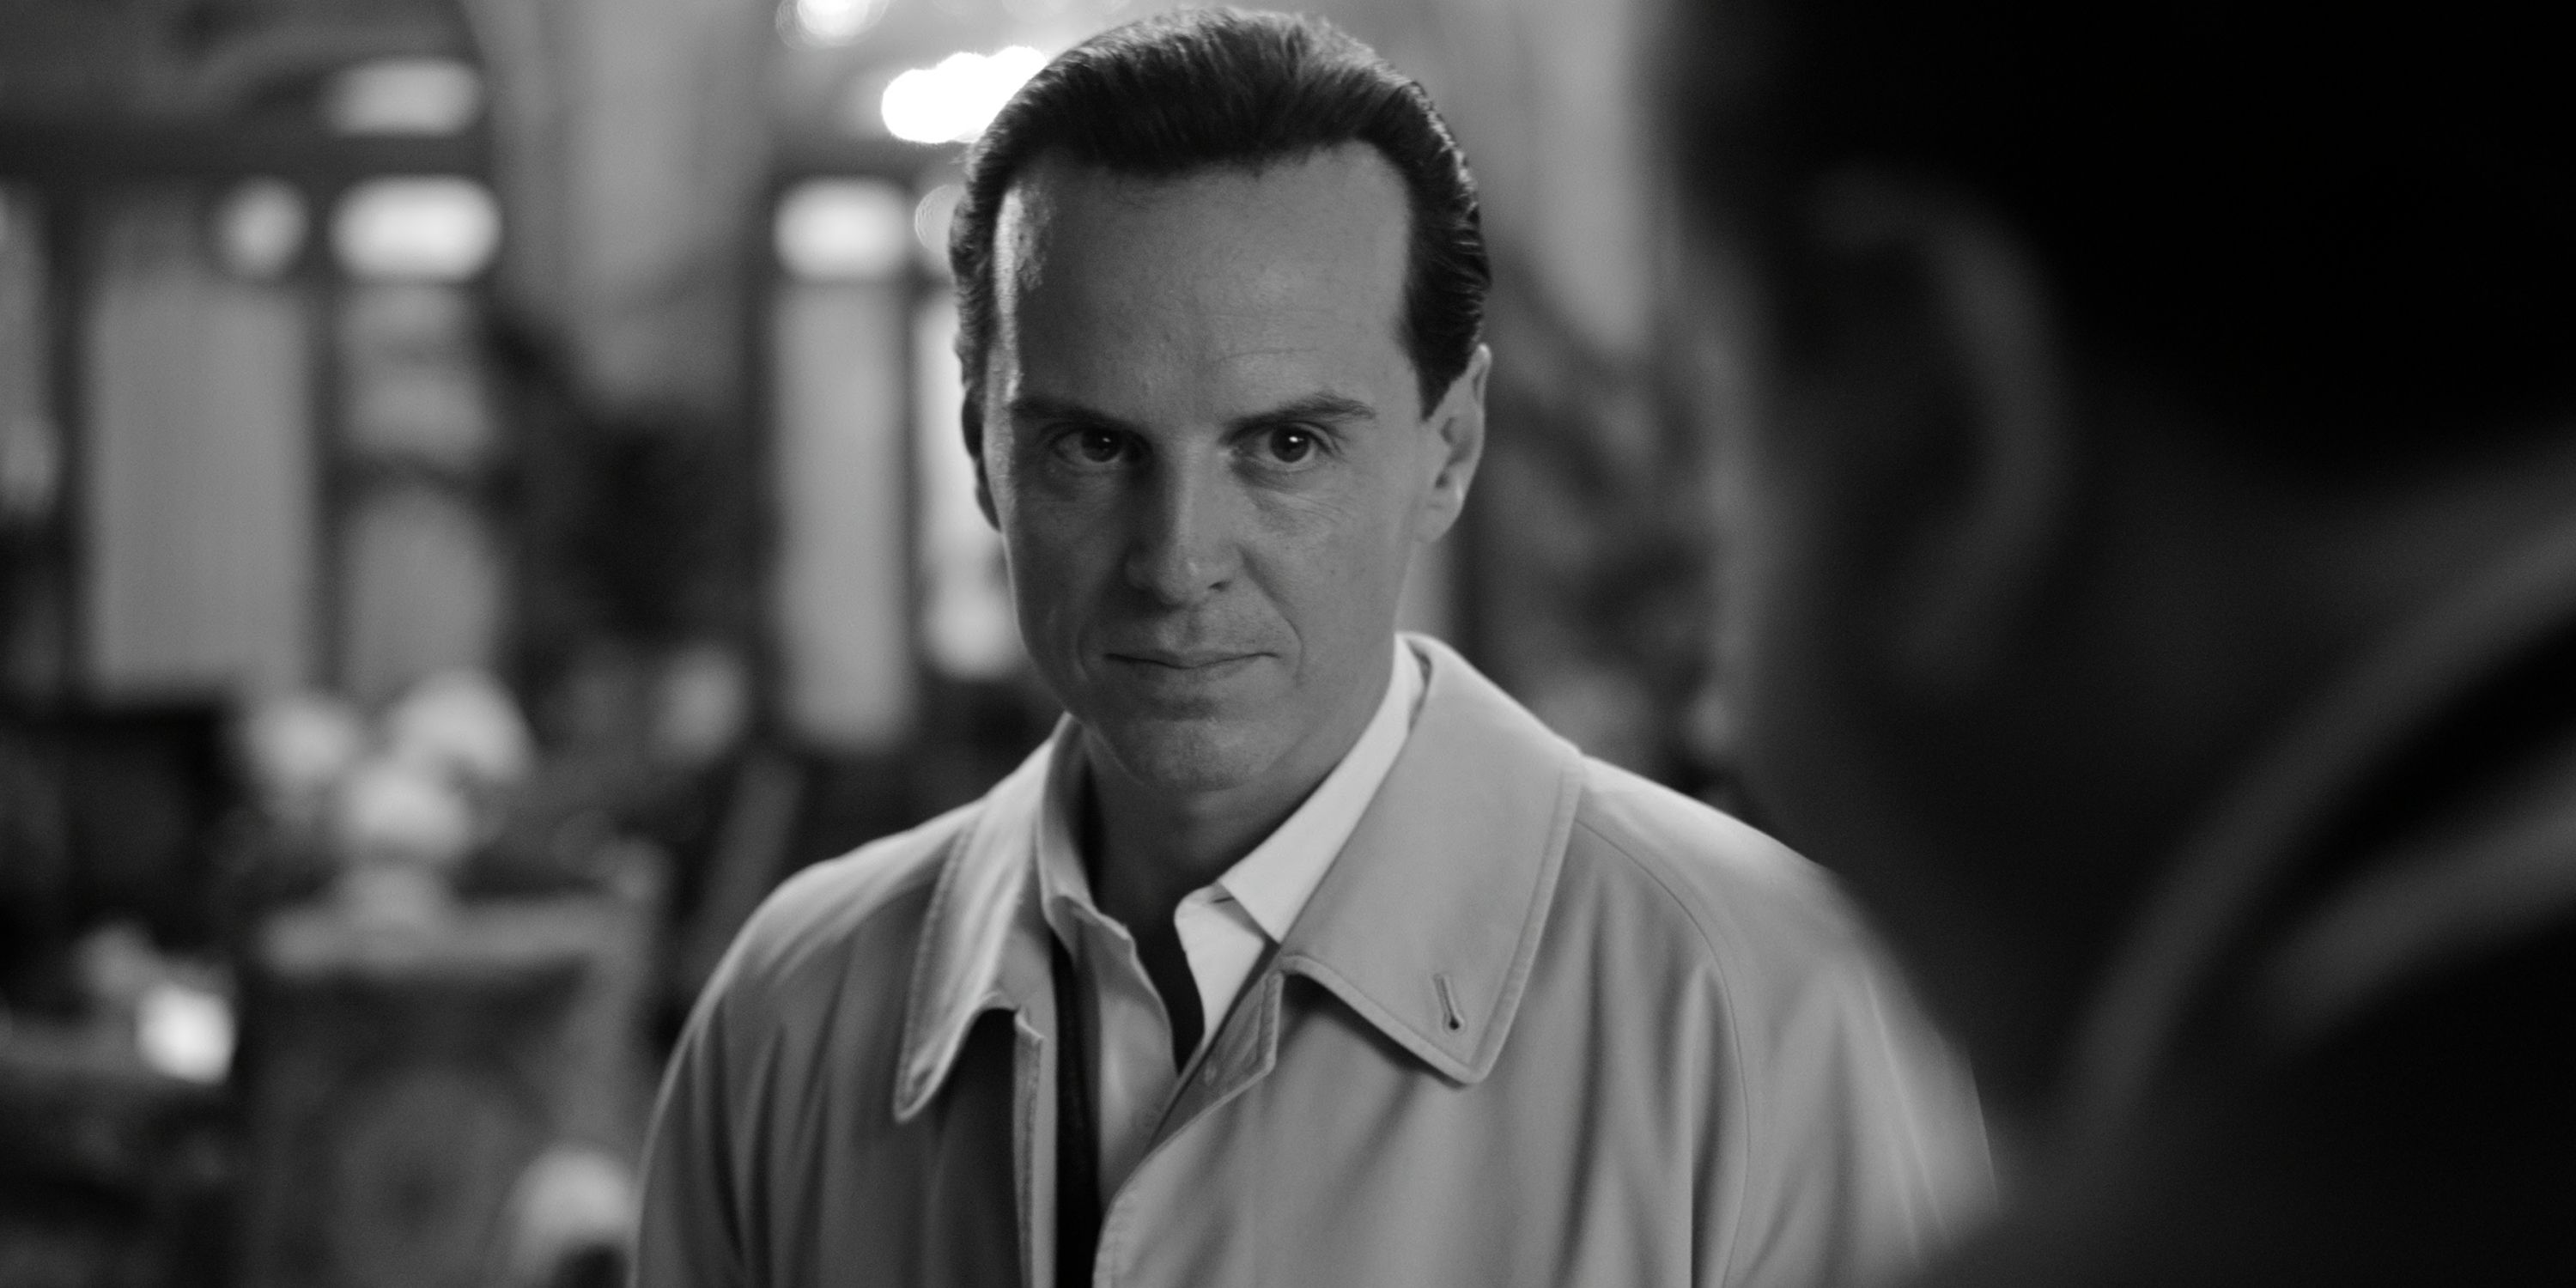 Andrew Scott as Tom Ripley staring into the camera in Episode 4 of Netflix's Ripley